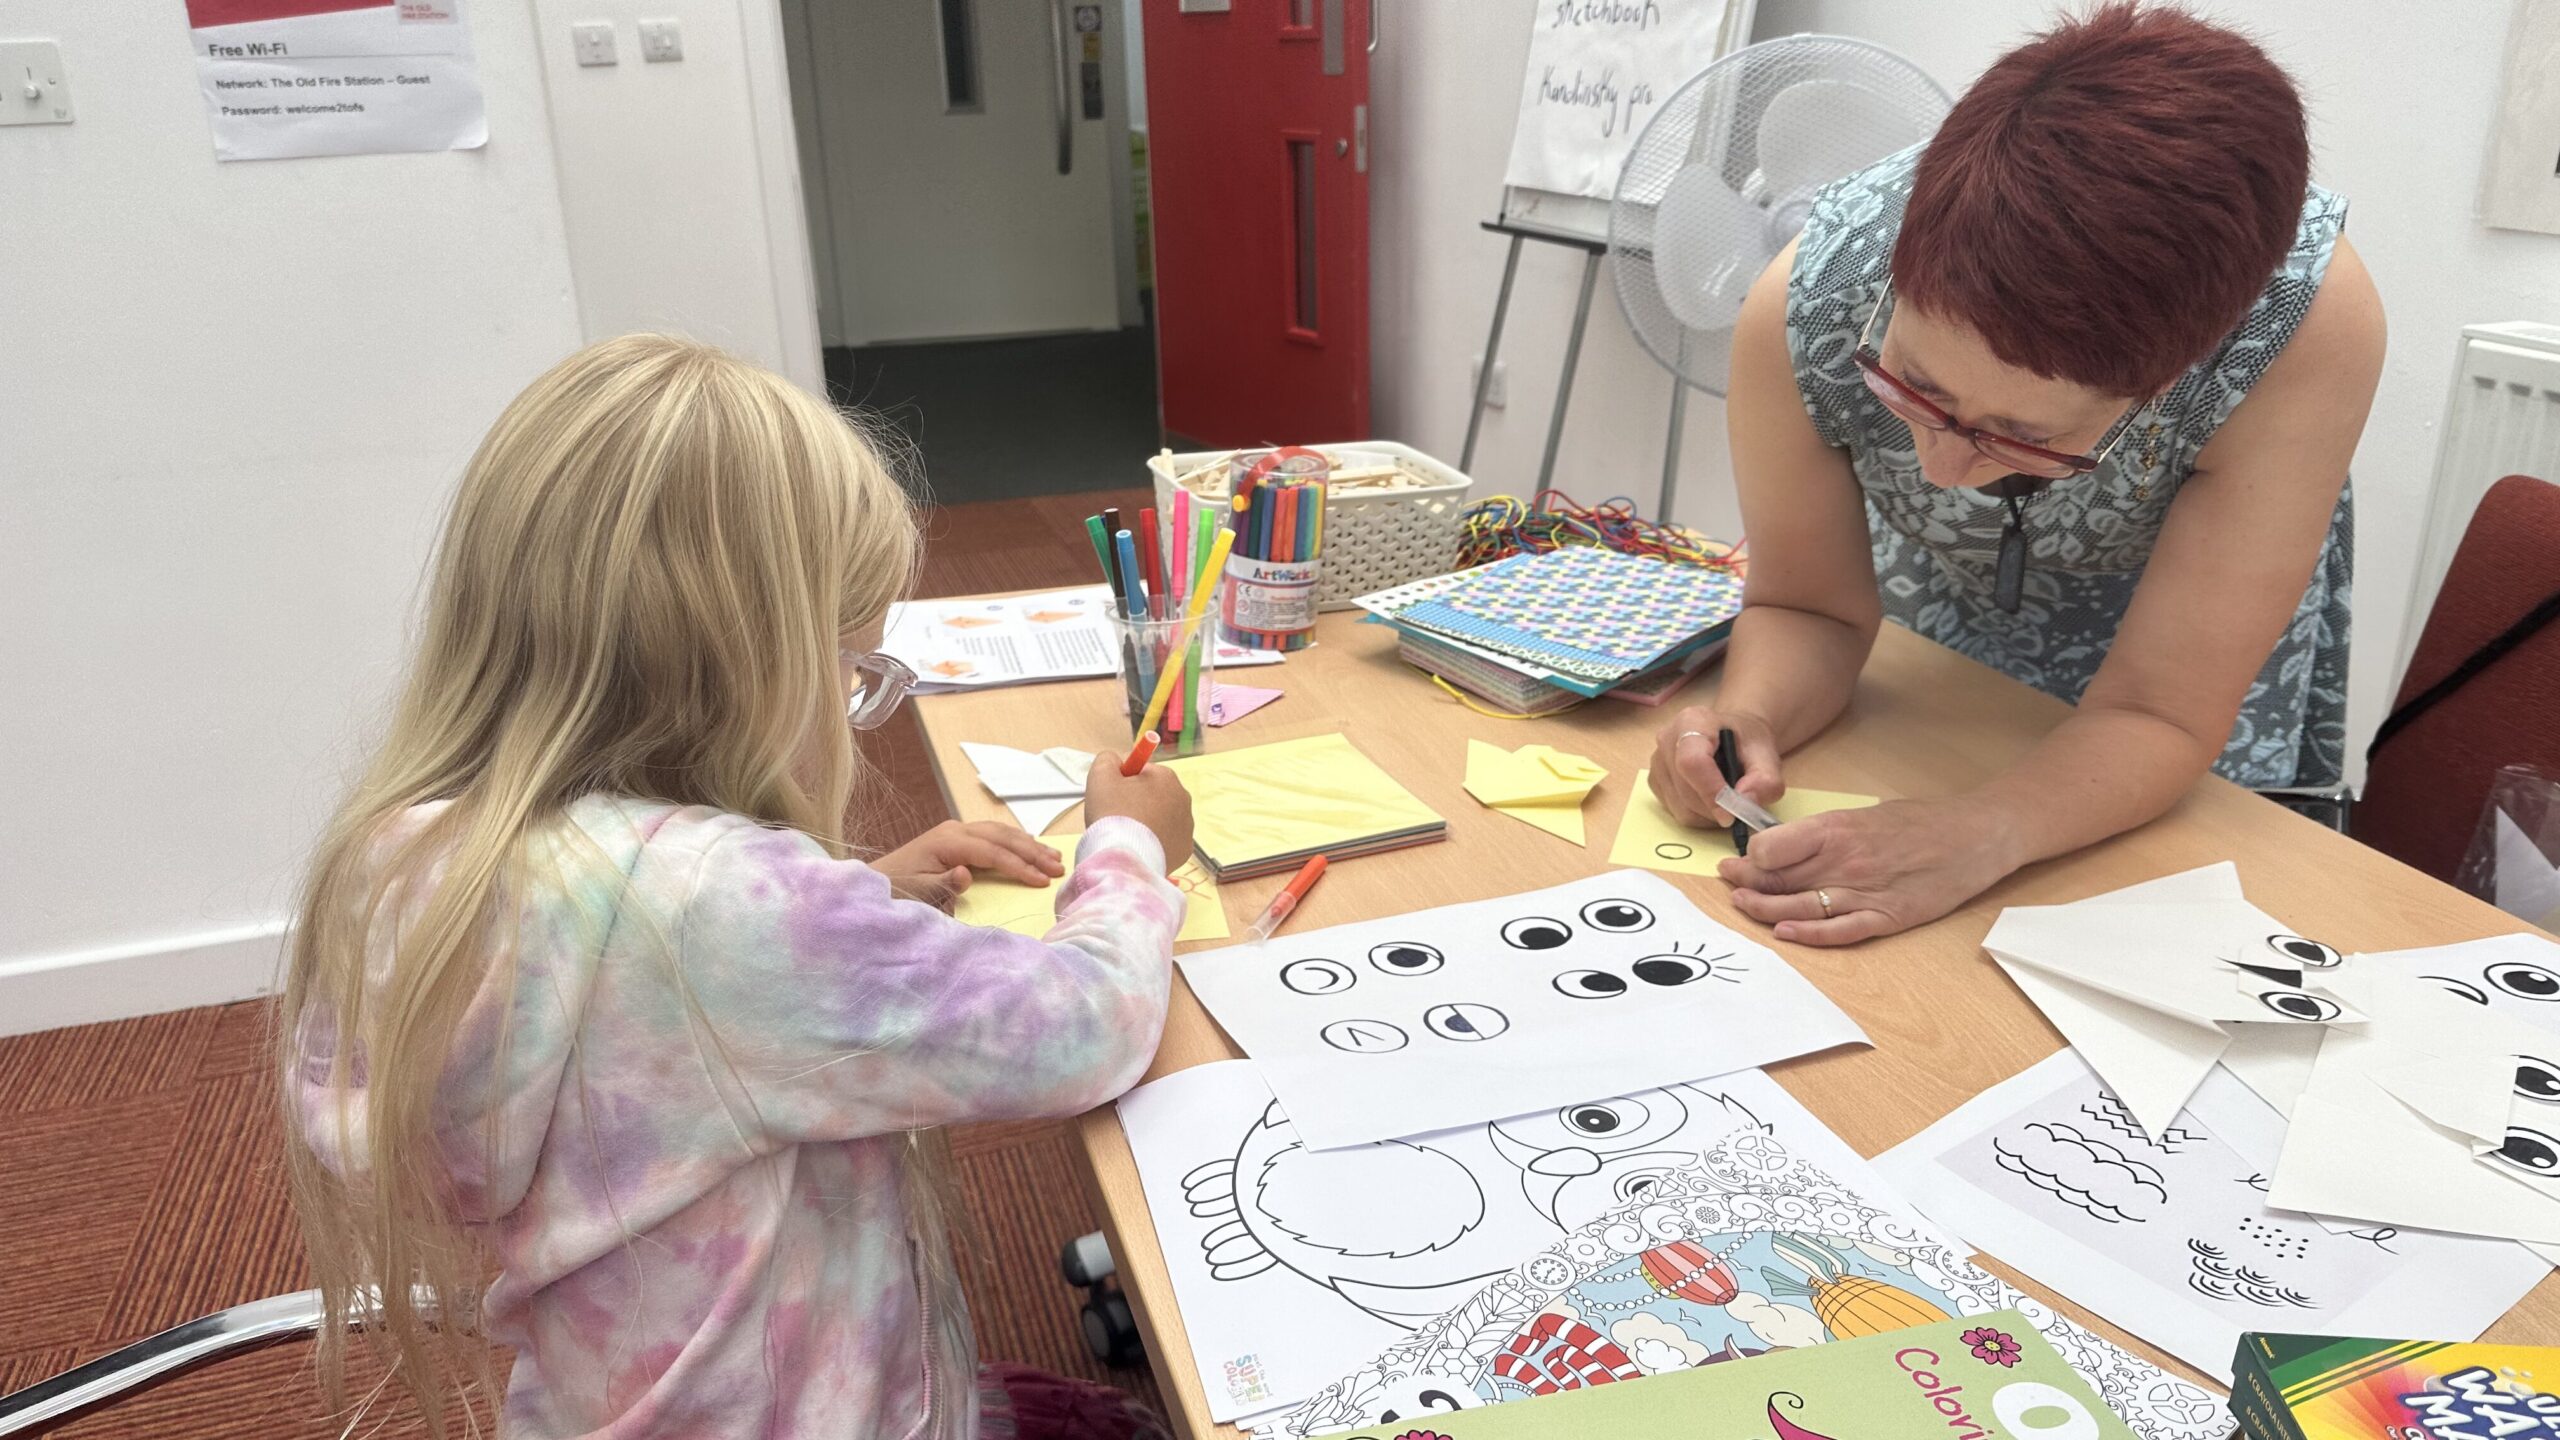 2 people are at a big table covered in origami paper, colouring pages, pens and paper owls. Jane, a woman with a light skin tone, short red hair and glasses is leaning over the table drawing with a black pen. A child with long blonde hair, a light skin tone, glasses and a top with lots of pastel colours is decorating her own paper owl.